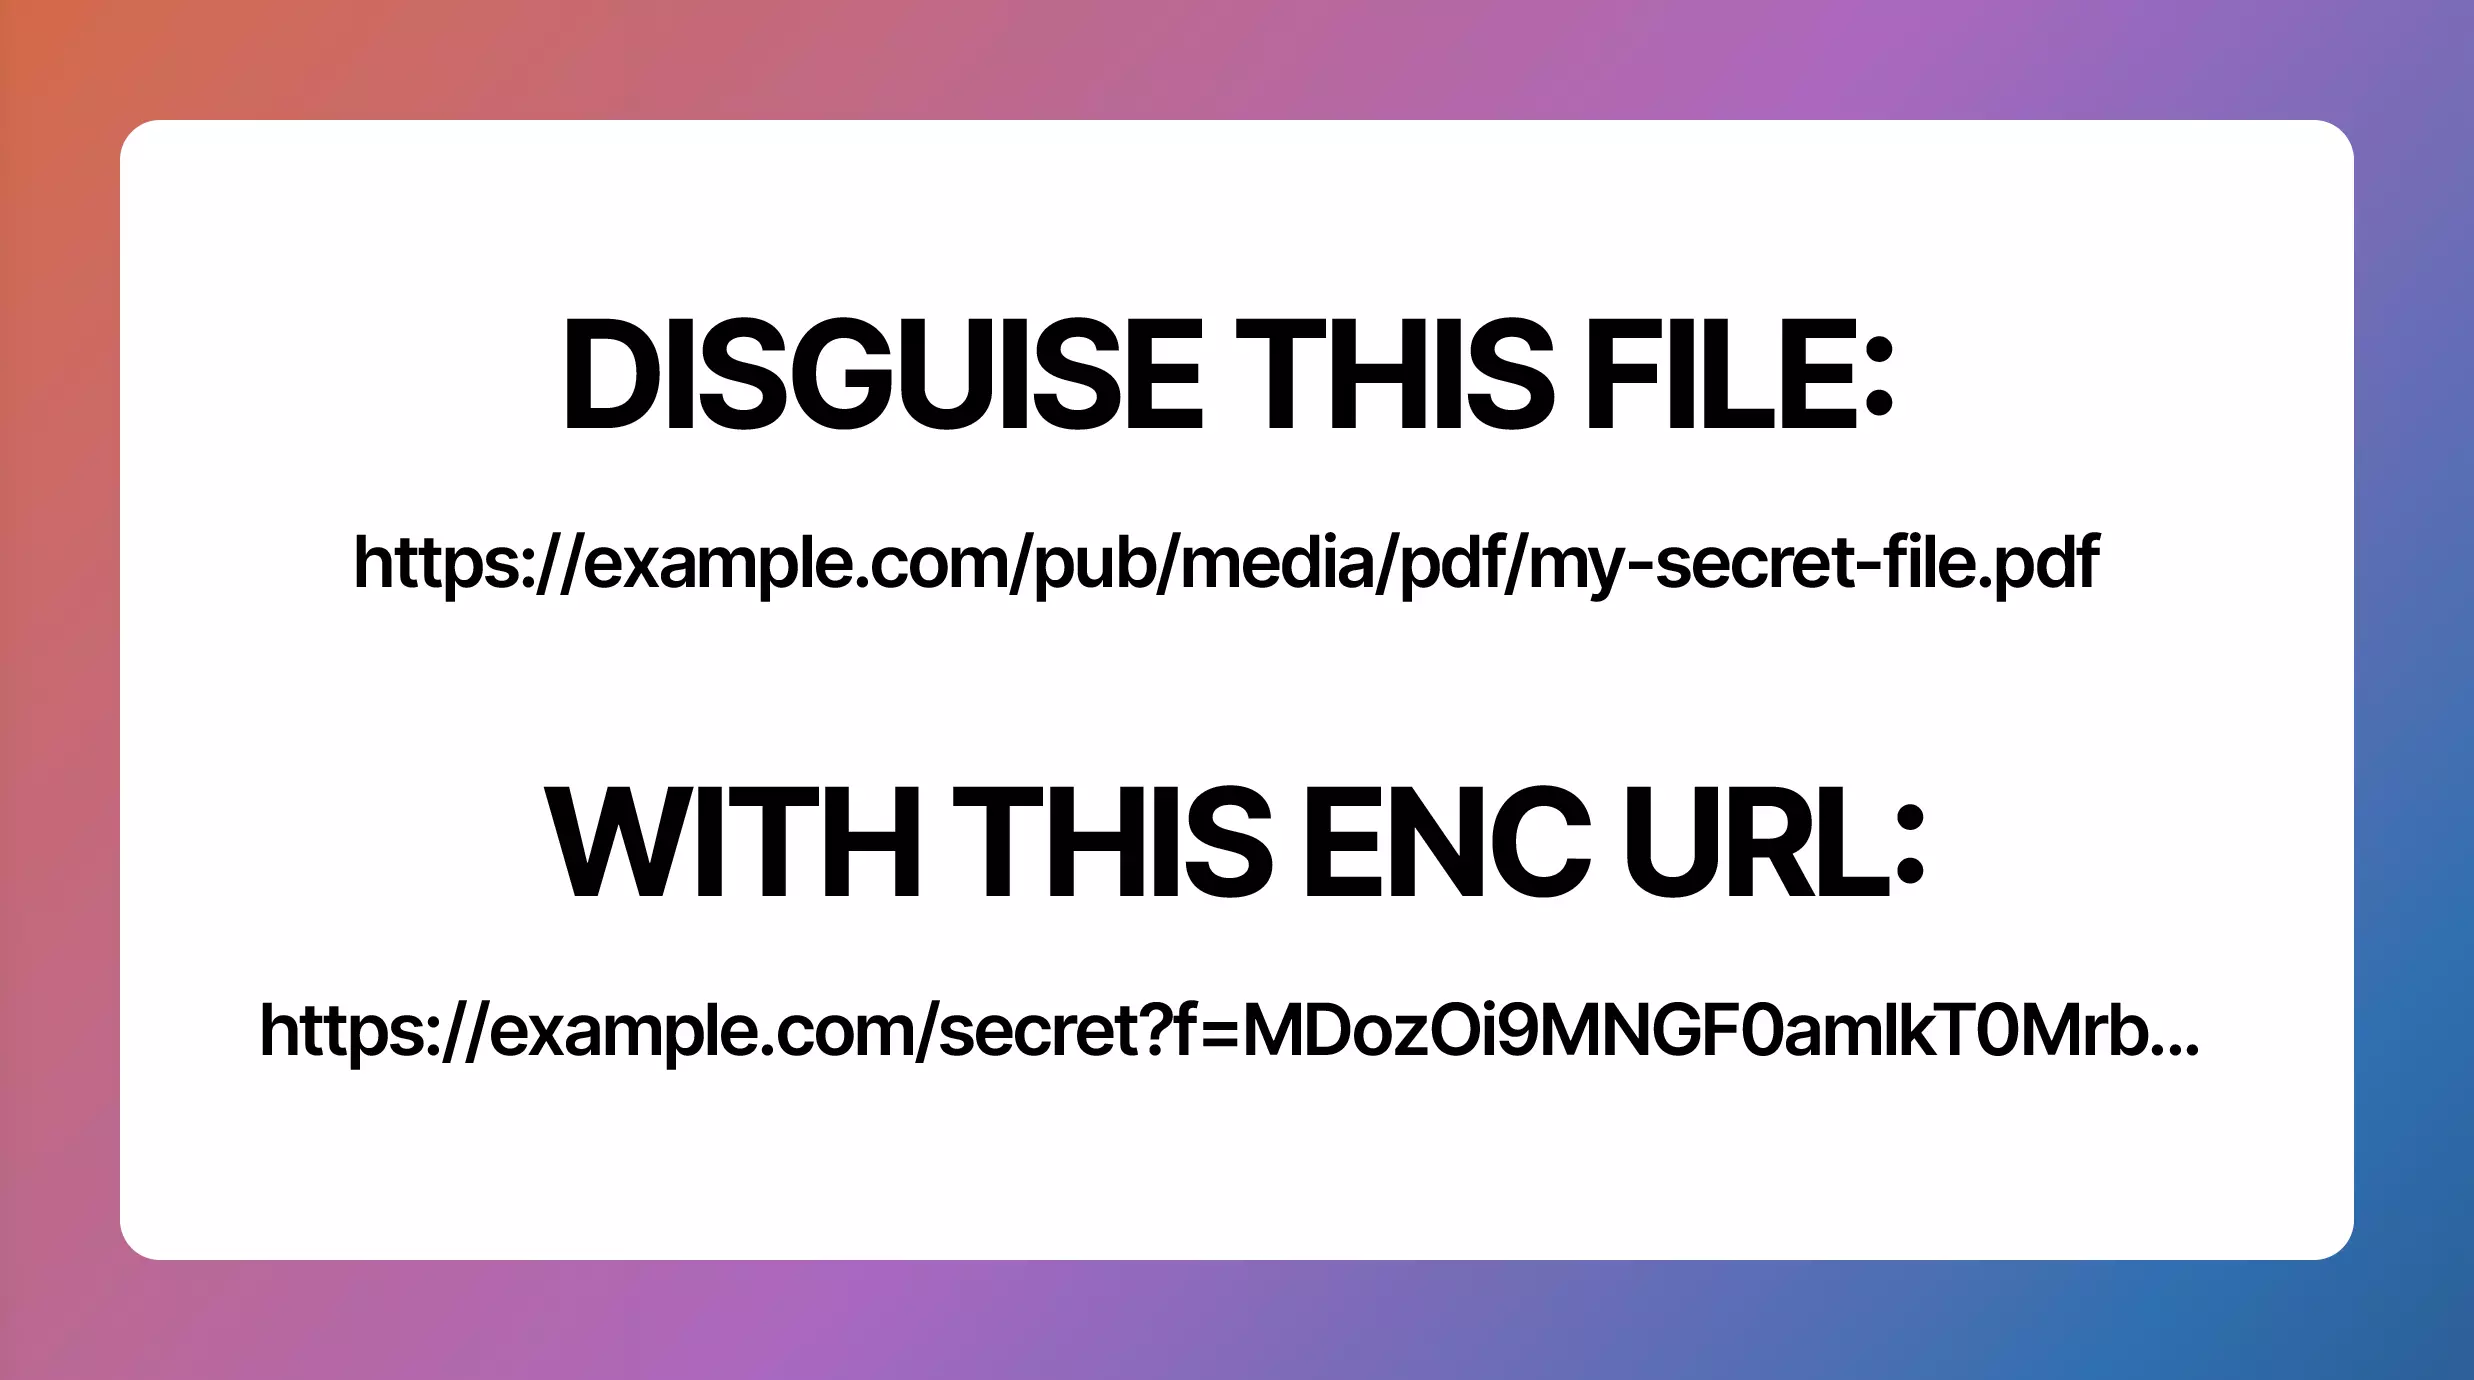 Disguise file as encrypted URL